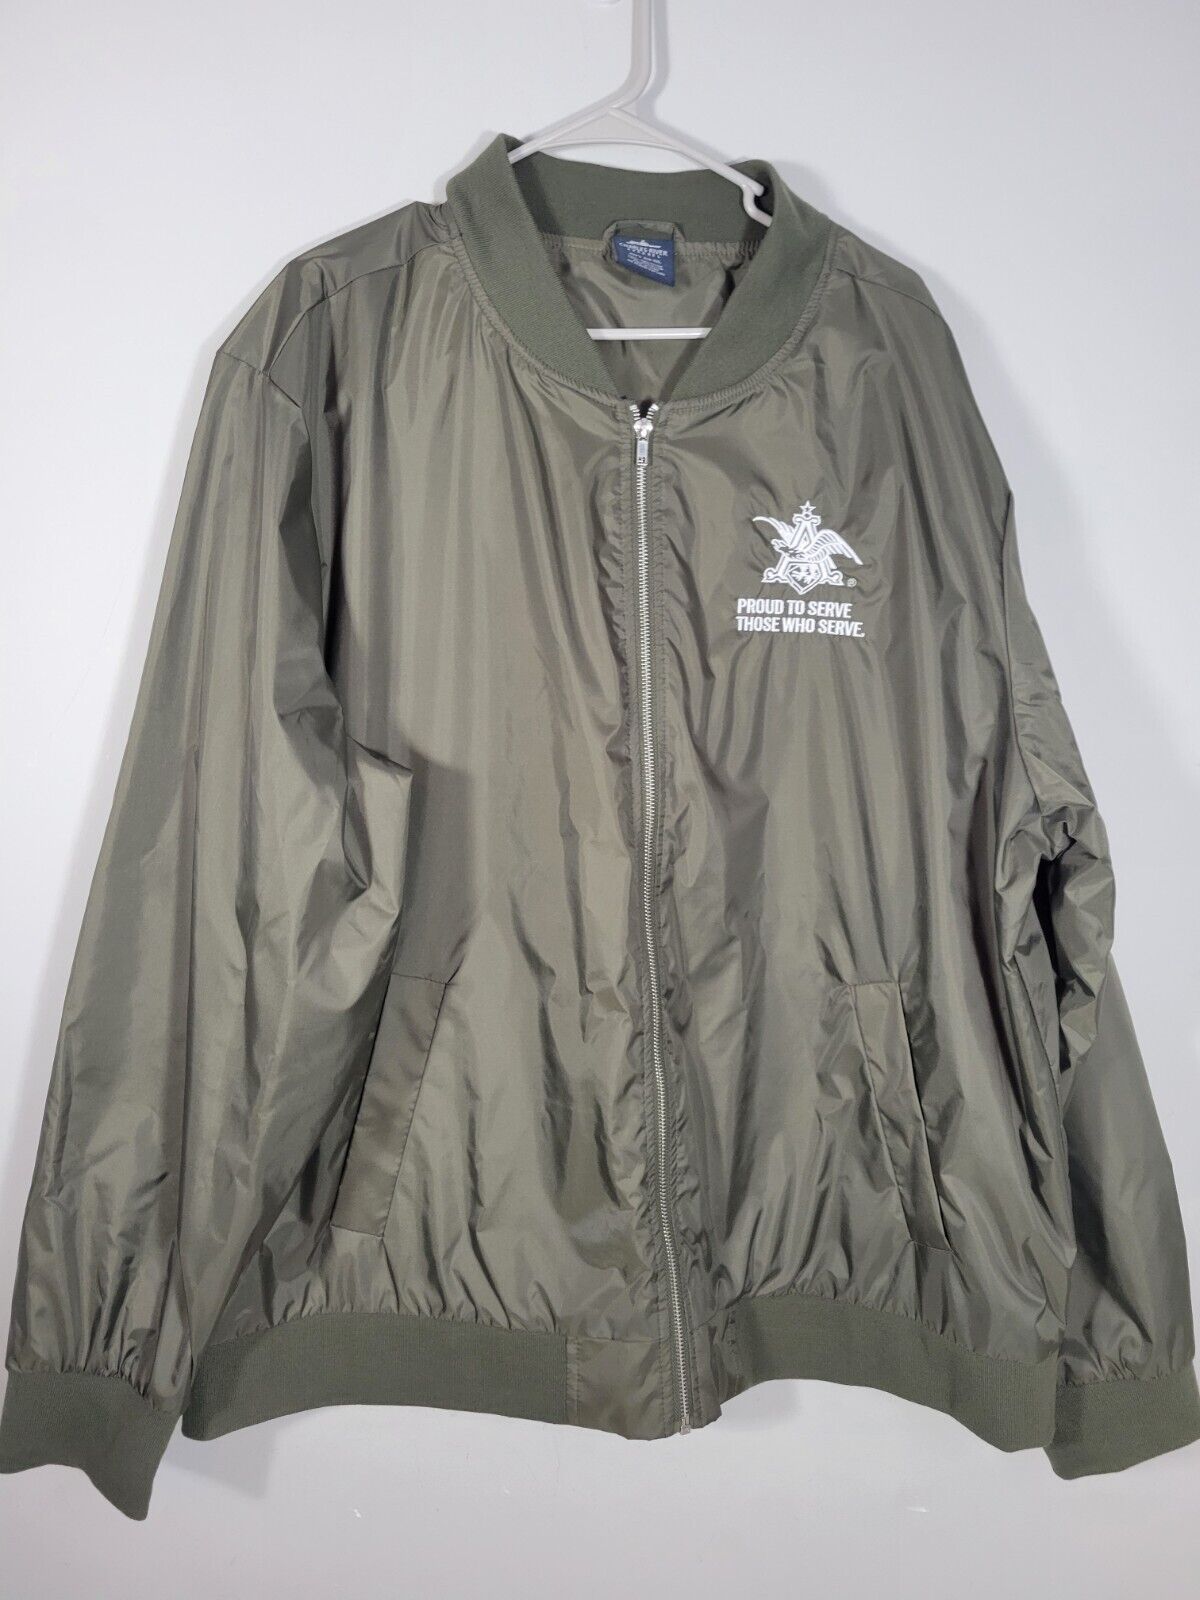 Anheuser-Busch Budweiser Proud to Serve those Who Serve Jacket 2XL  Green/Brown